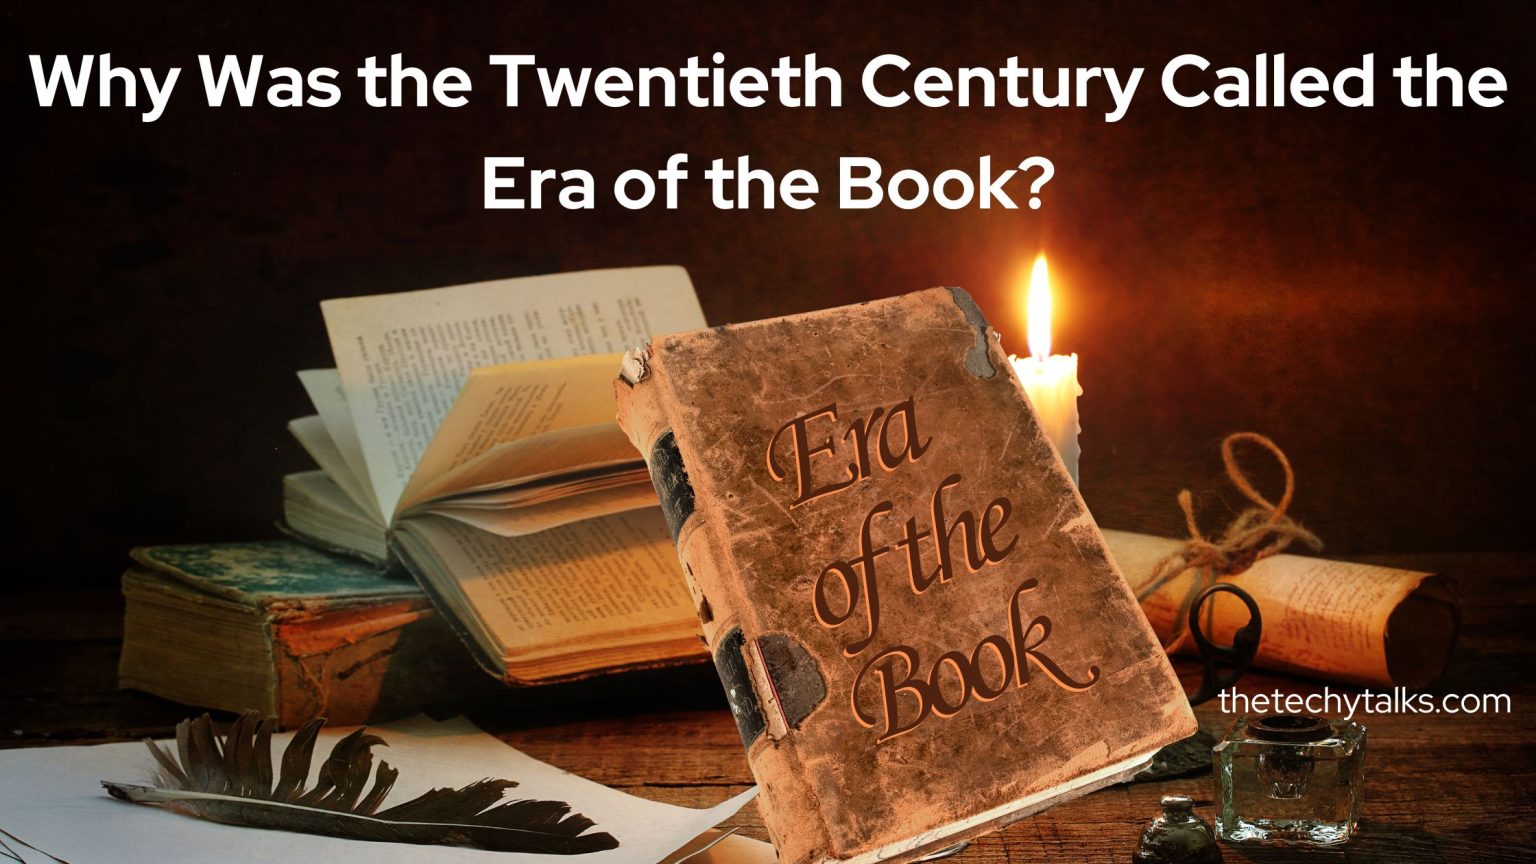 Why Was the Twentieth Century Called the Era of the Book?